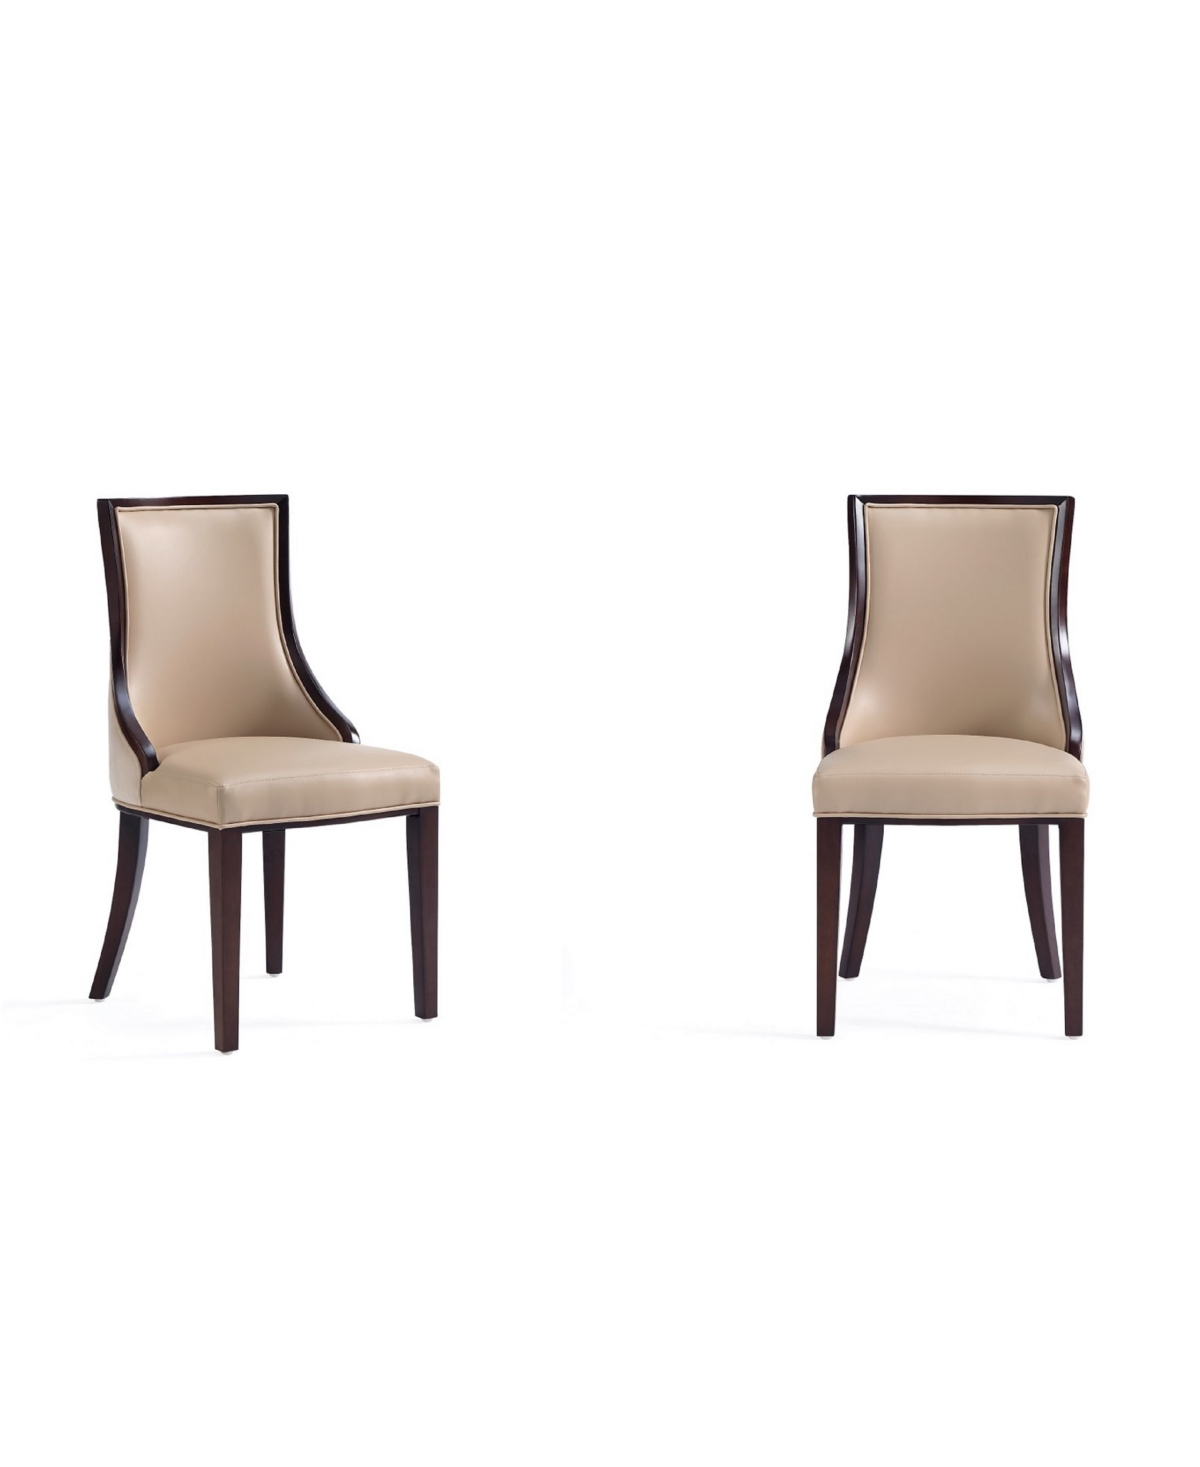 Manhattan Comfort Grand 2-piece Beech Wood Faux Leather Upholstered Dining Chair Set In Tan